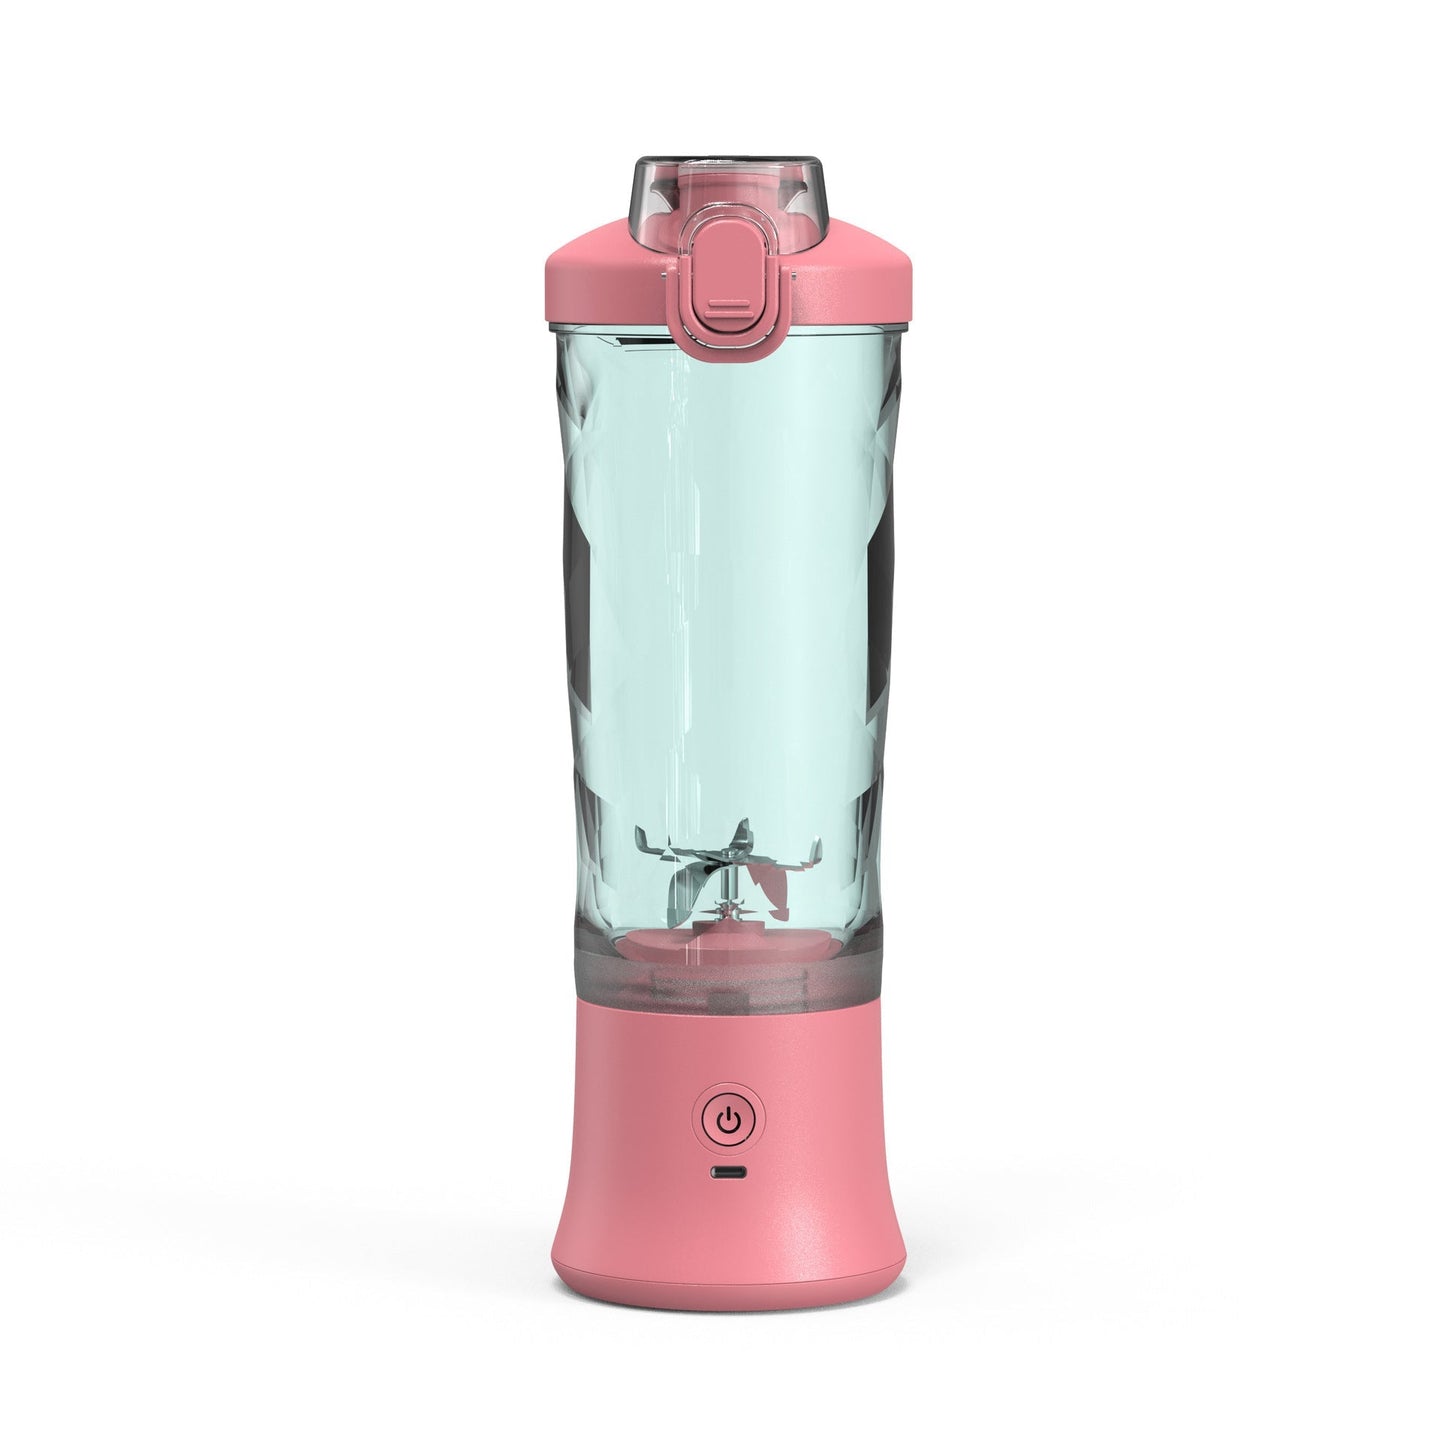 VitaFusion - The handheld blender for delicious smoothies and shakes